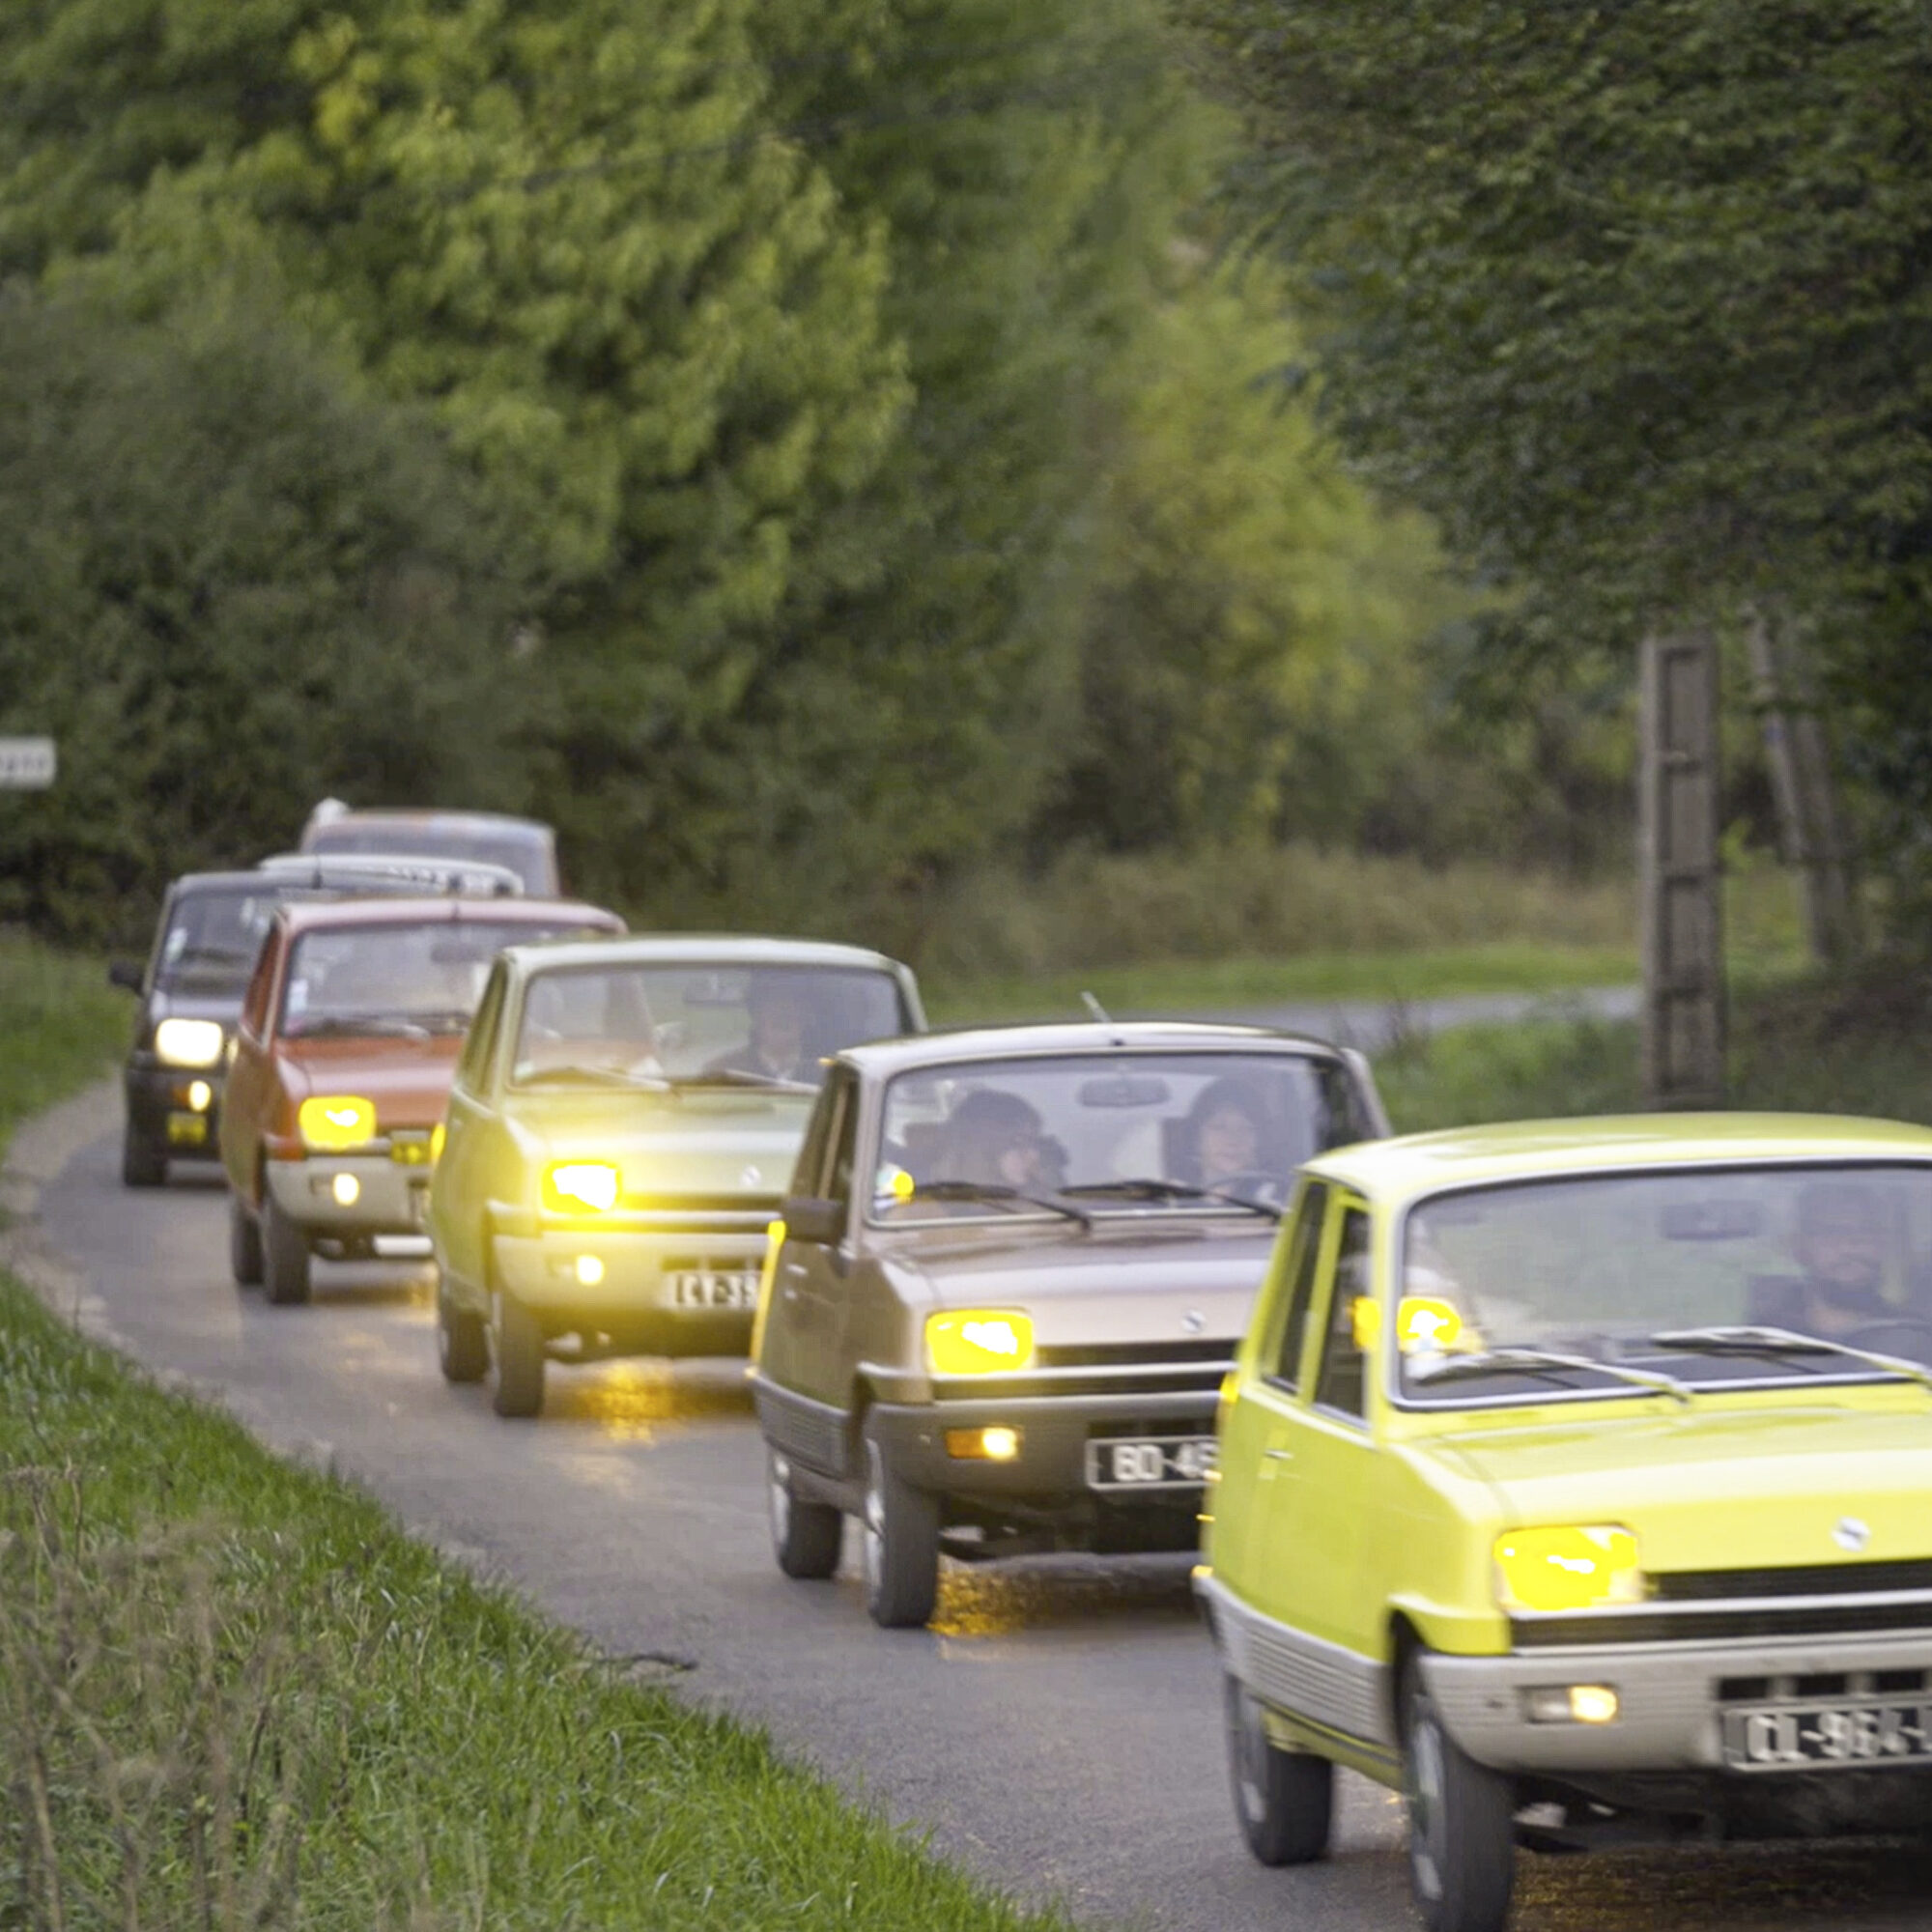 Story - Sixty Renault 5 and thousands of memories: a meeting of AIR-5 enthusiasts